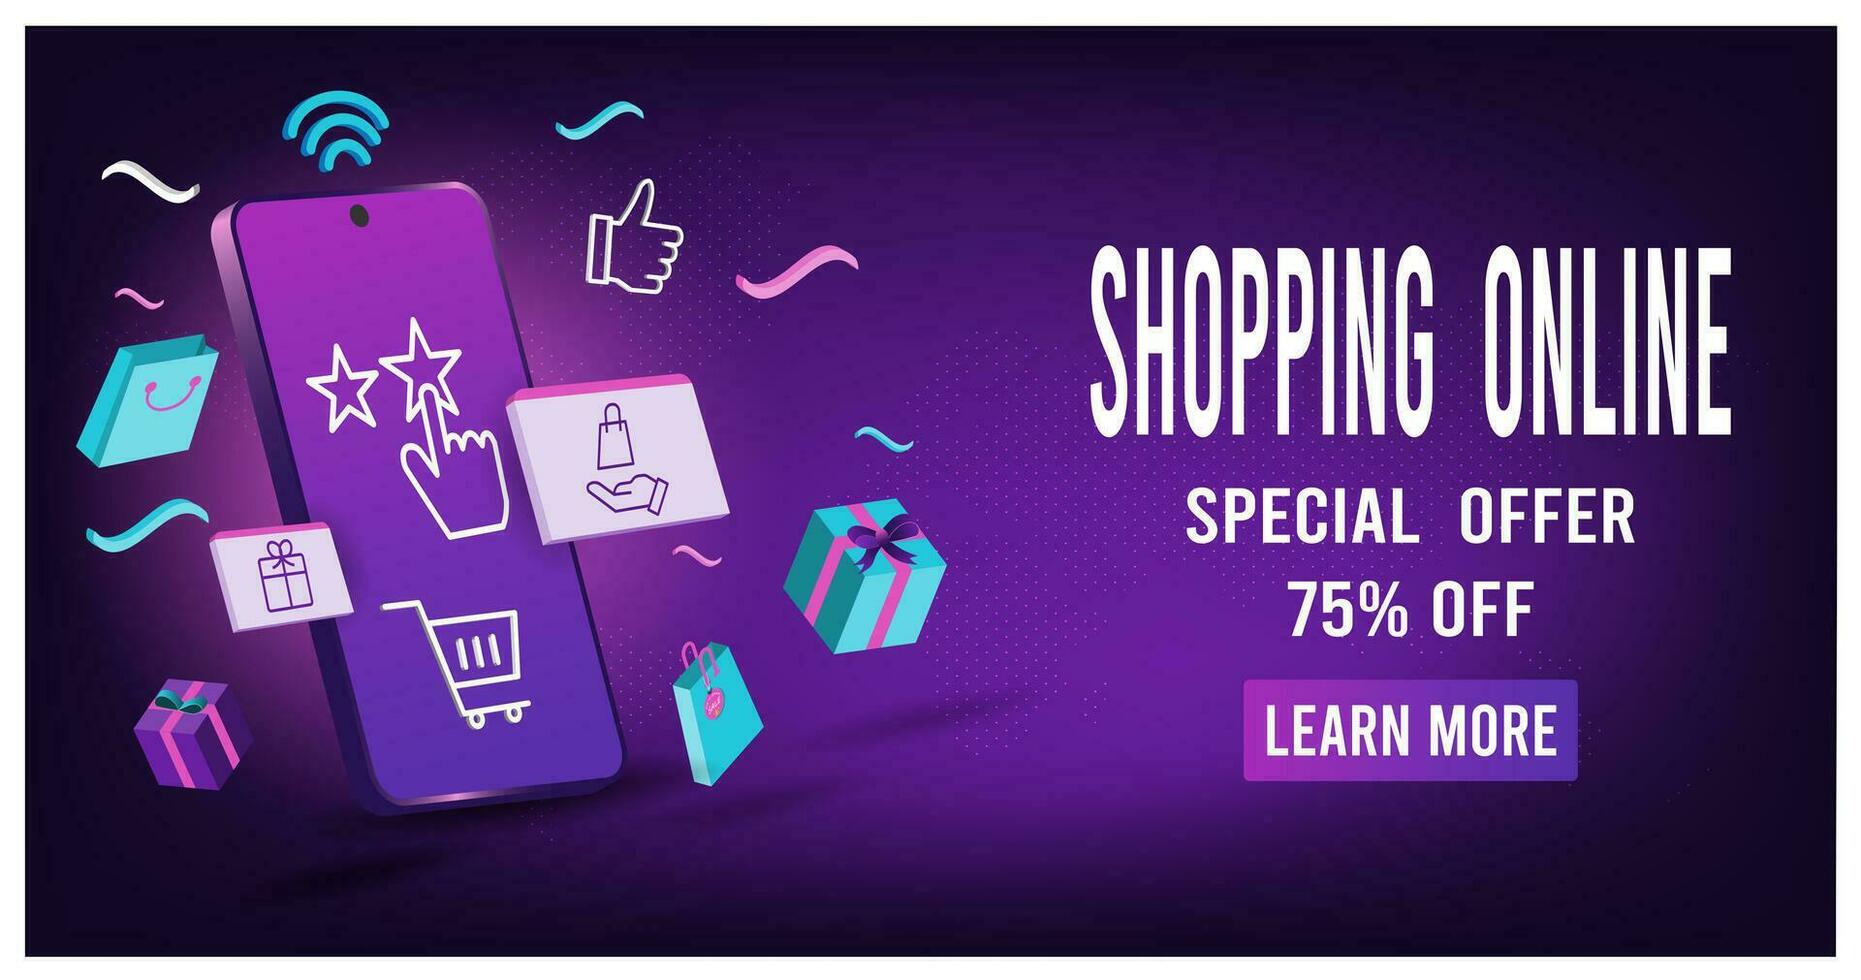 Shopping online concept for website, mobile application, web banner, info graphics or discount coupons. Vector illustration eps10